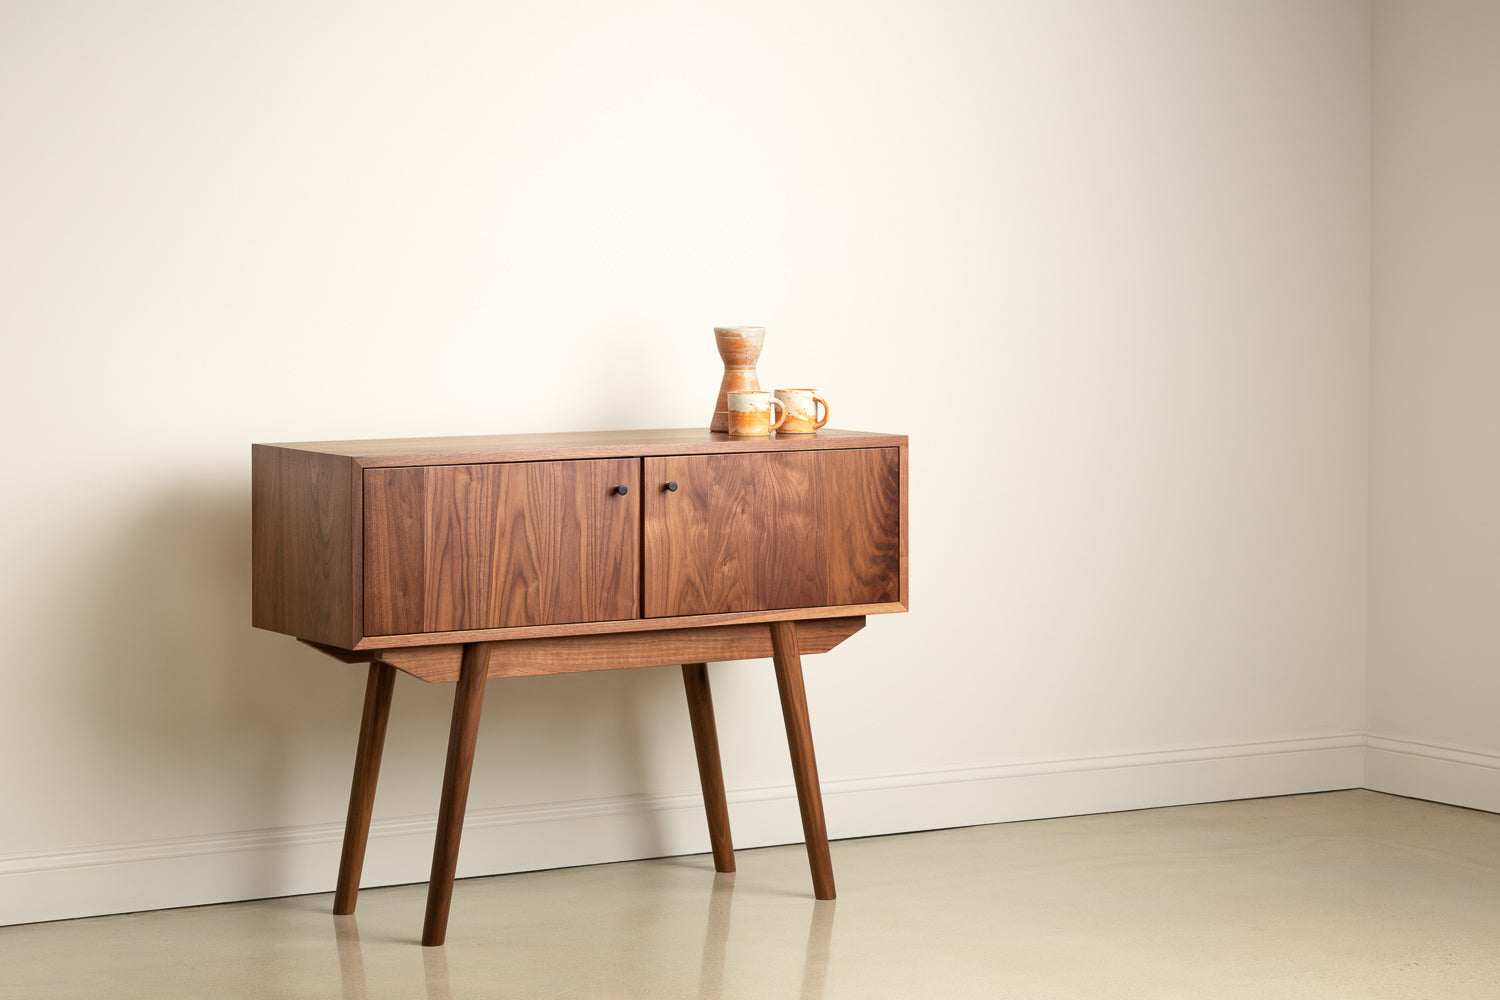 Fjord Large Sideboard in walnut with white and orange coffee mugs on top